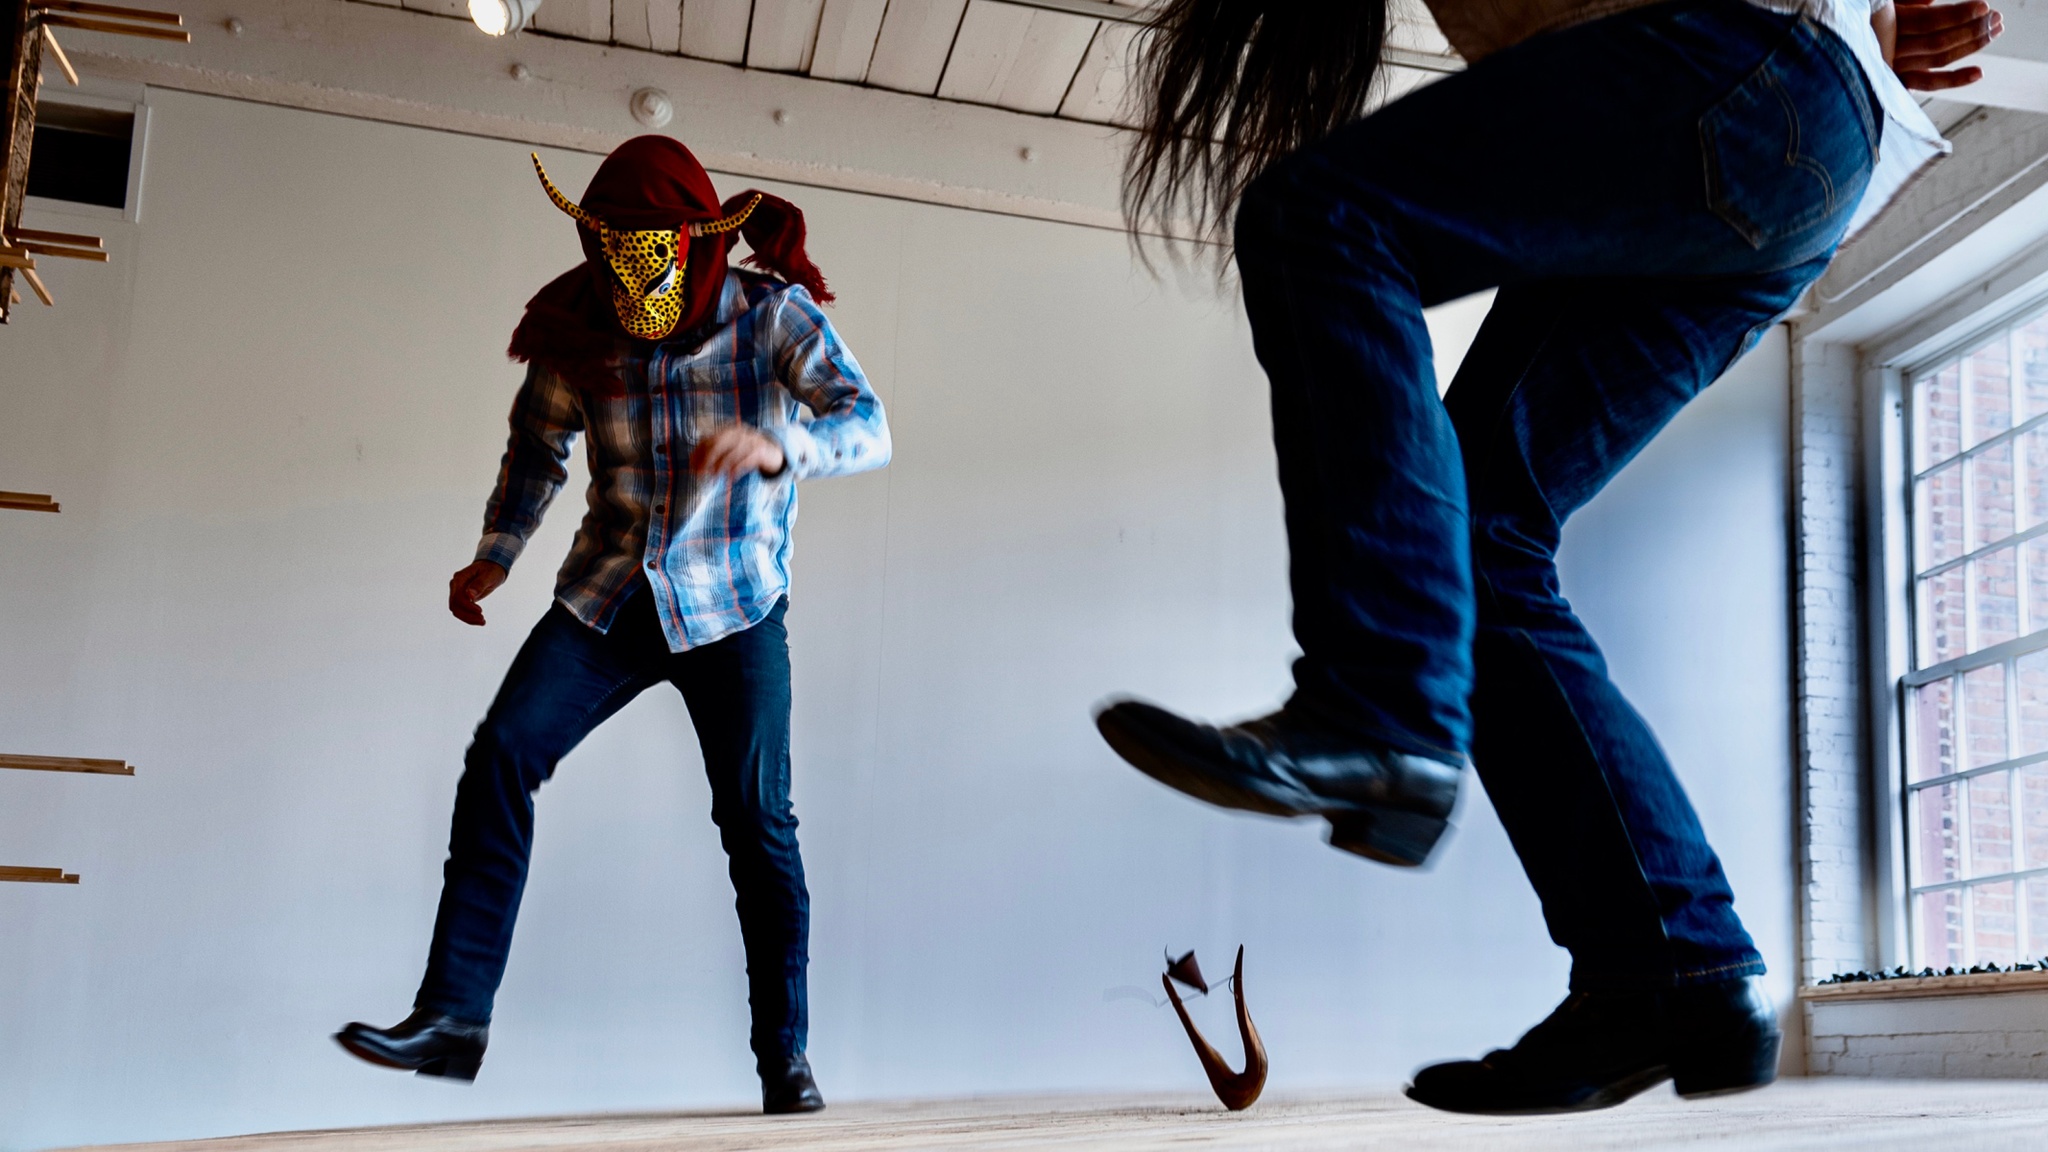 Two performers stand in a nondescript room on a wooden platform. They are both seen from an angle slightly below, one of them is cut off by the frame of the image so we see only legs and long hair hanging down from where the performer bends over. The other performer is seen in full, wearing jeans and boots, a blue plaid shirt, and a head covering including a ceremonial mask that resembles a jaguar’s face with two long, thin horns. Both are suspended in air slightly above the ground, stomping.